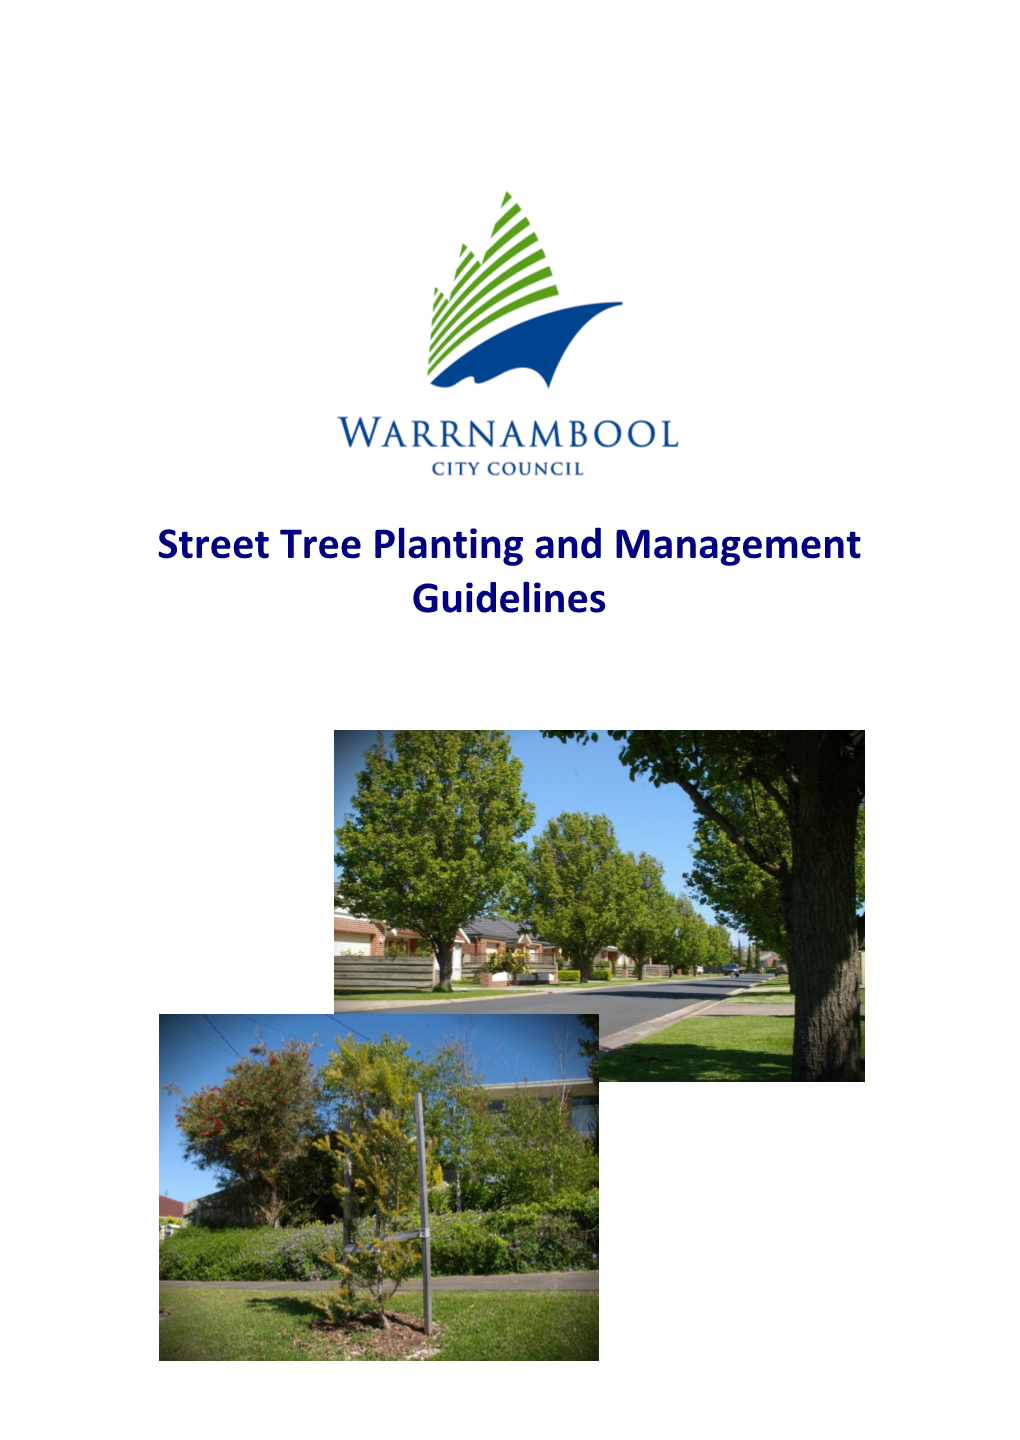 Street Tree Planting and Management Guidelines